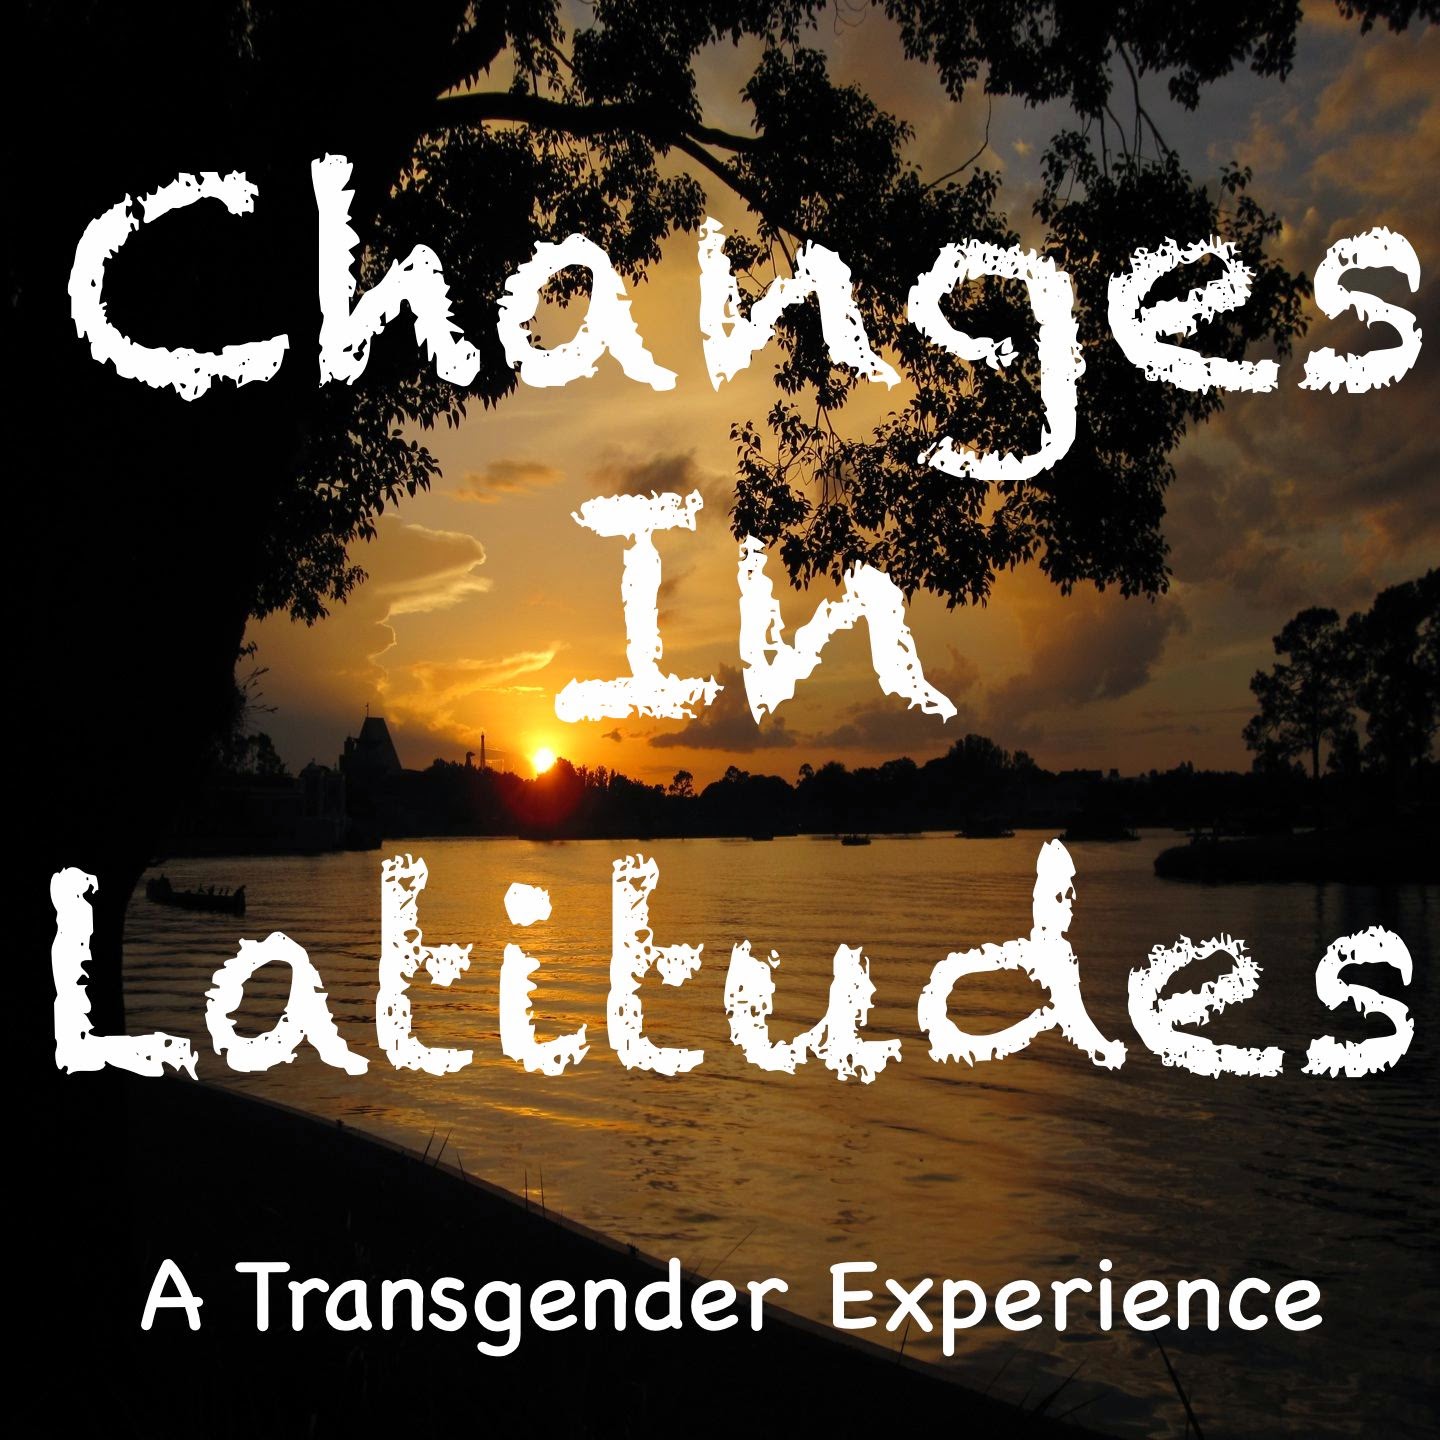 Changes In Latitudes: A Transgender Experience